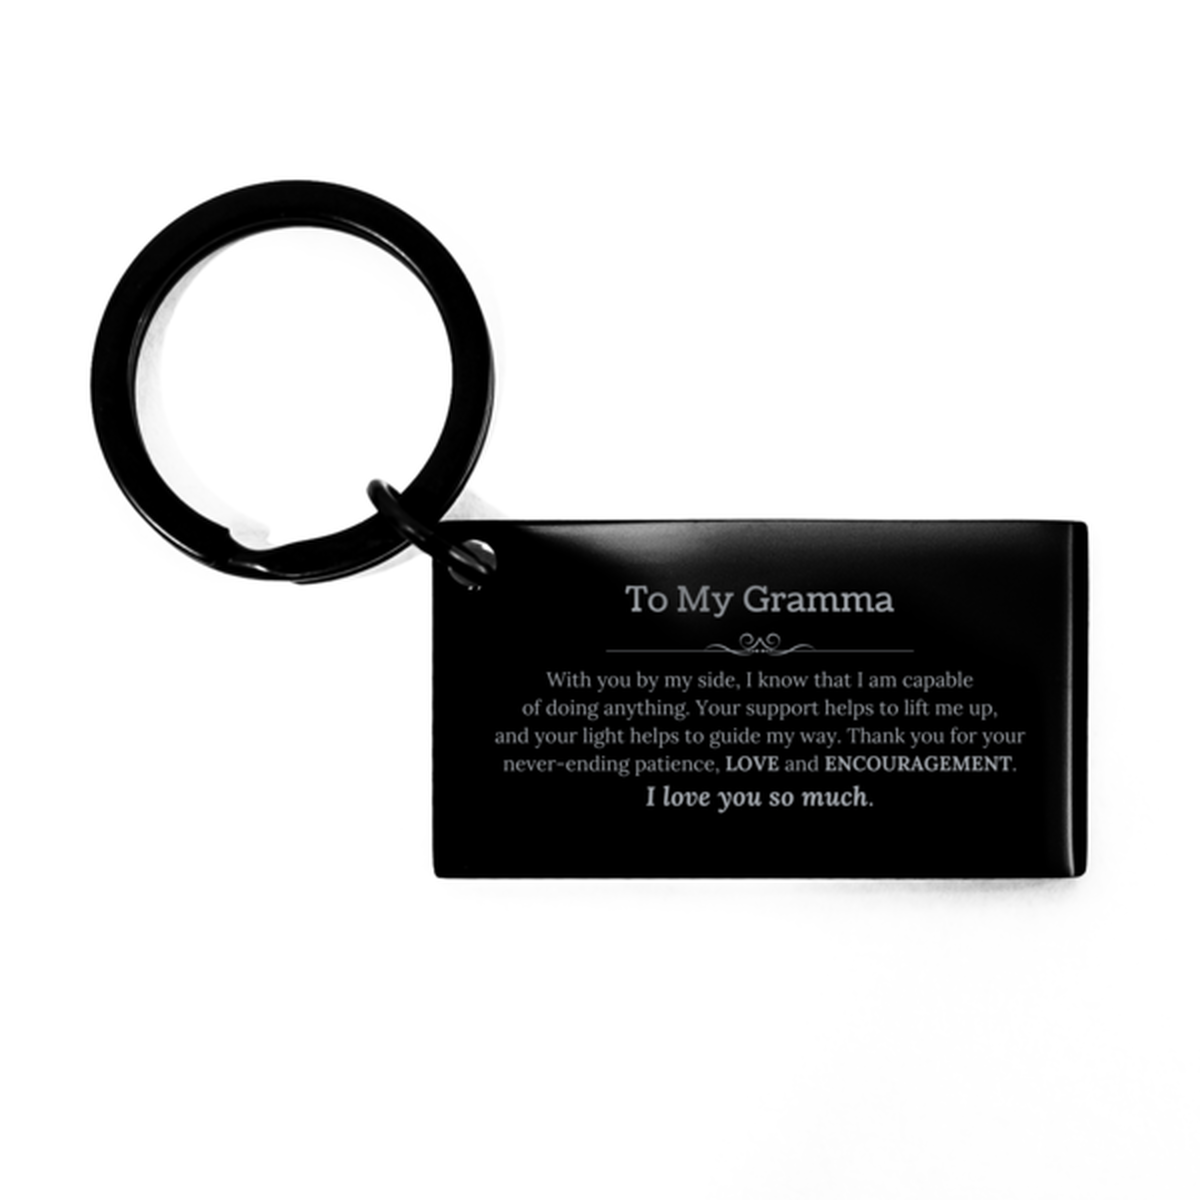 Appreciation Gramma Keychain Gifts, To My Gramma Birthday Christmas Wedding Keepsake Gifts for Gramma With you by my side, I know that I am capable of doing anything. I love you so much